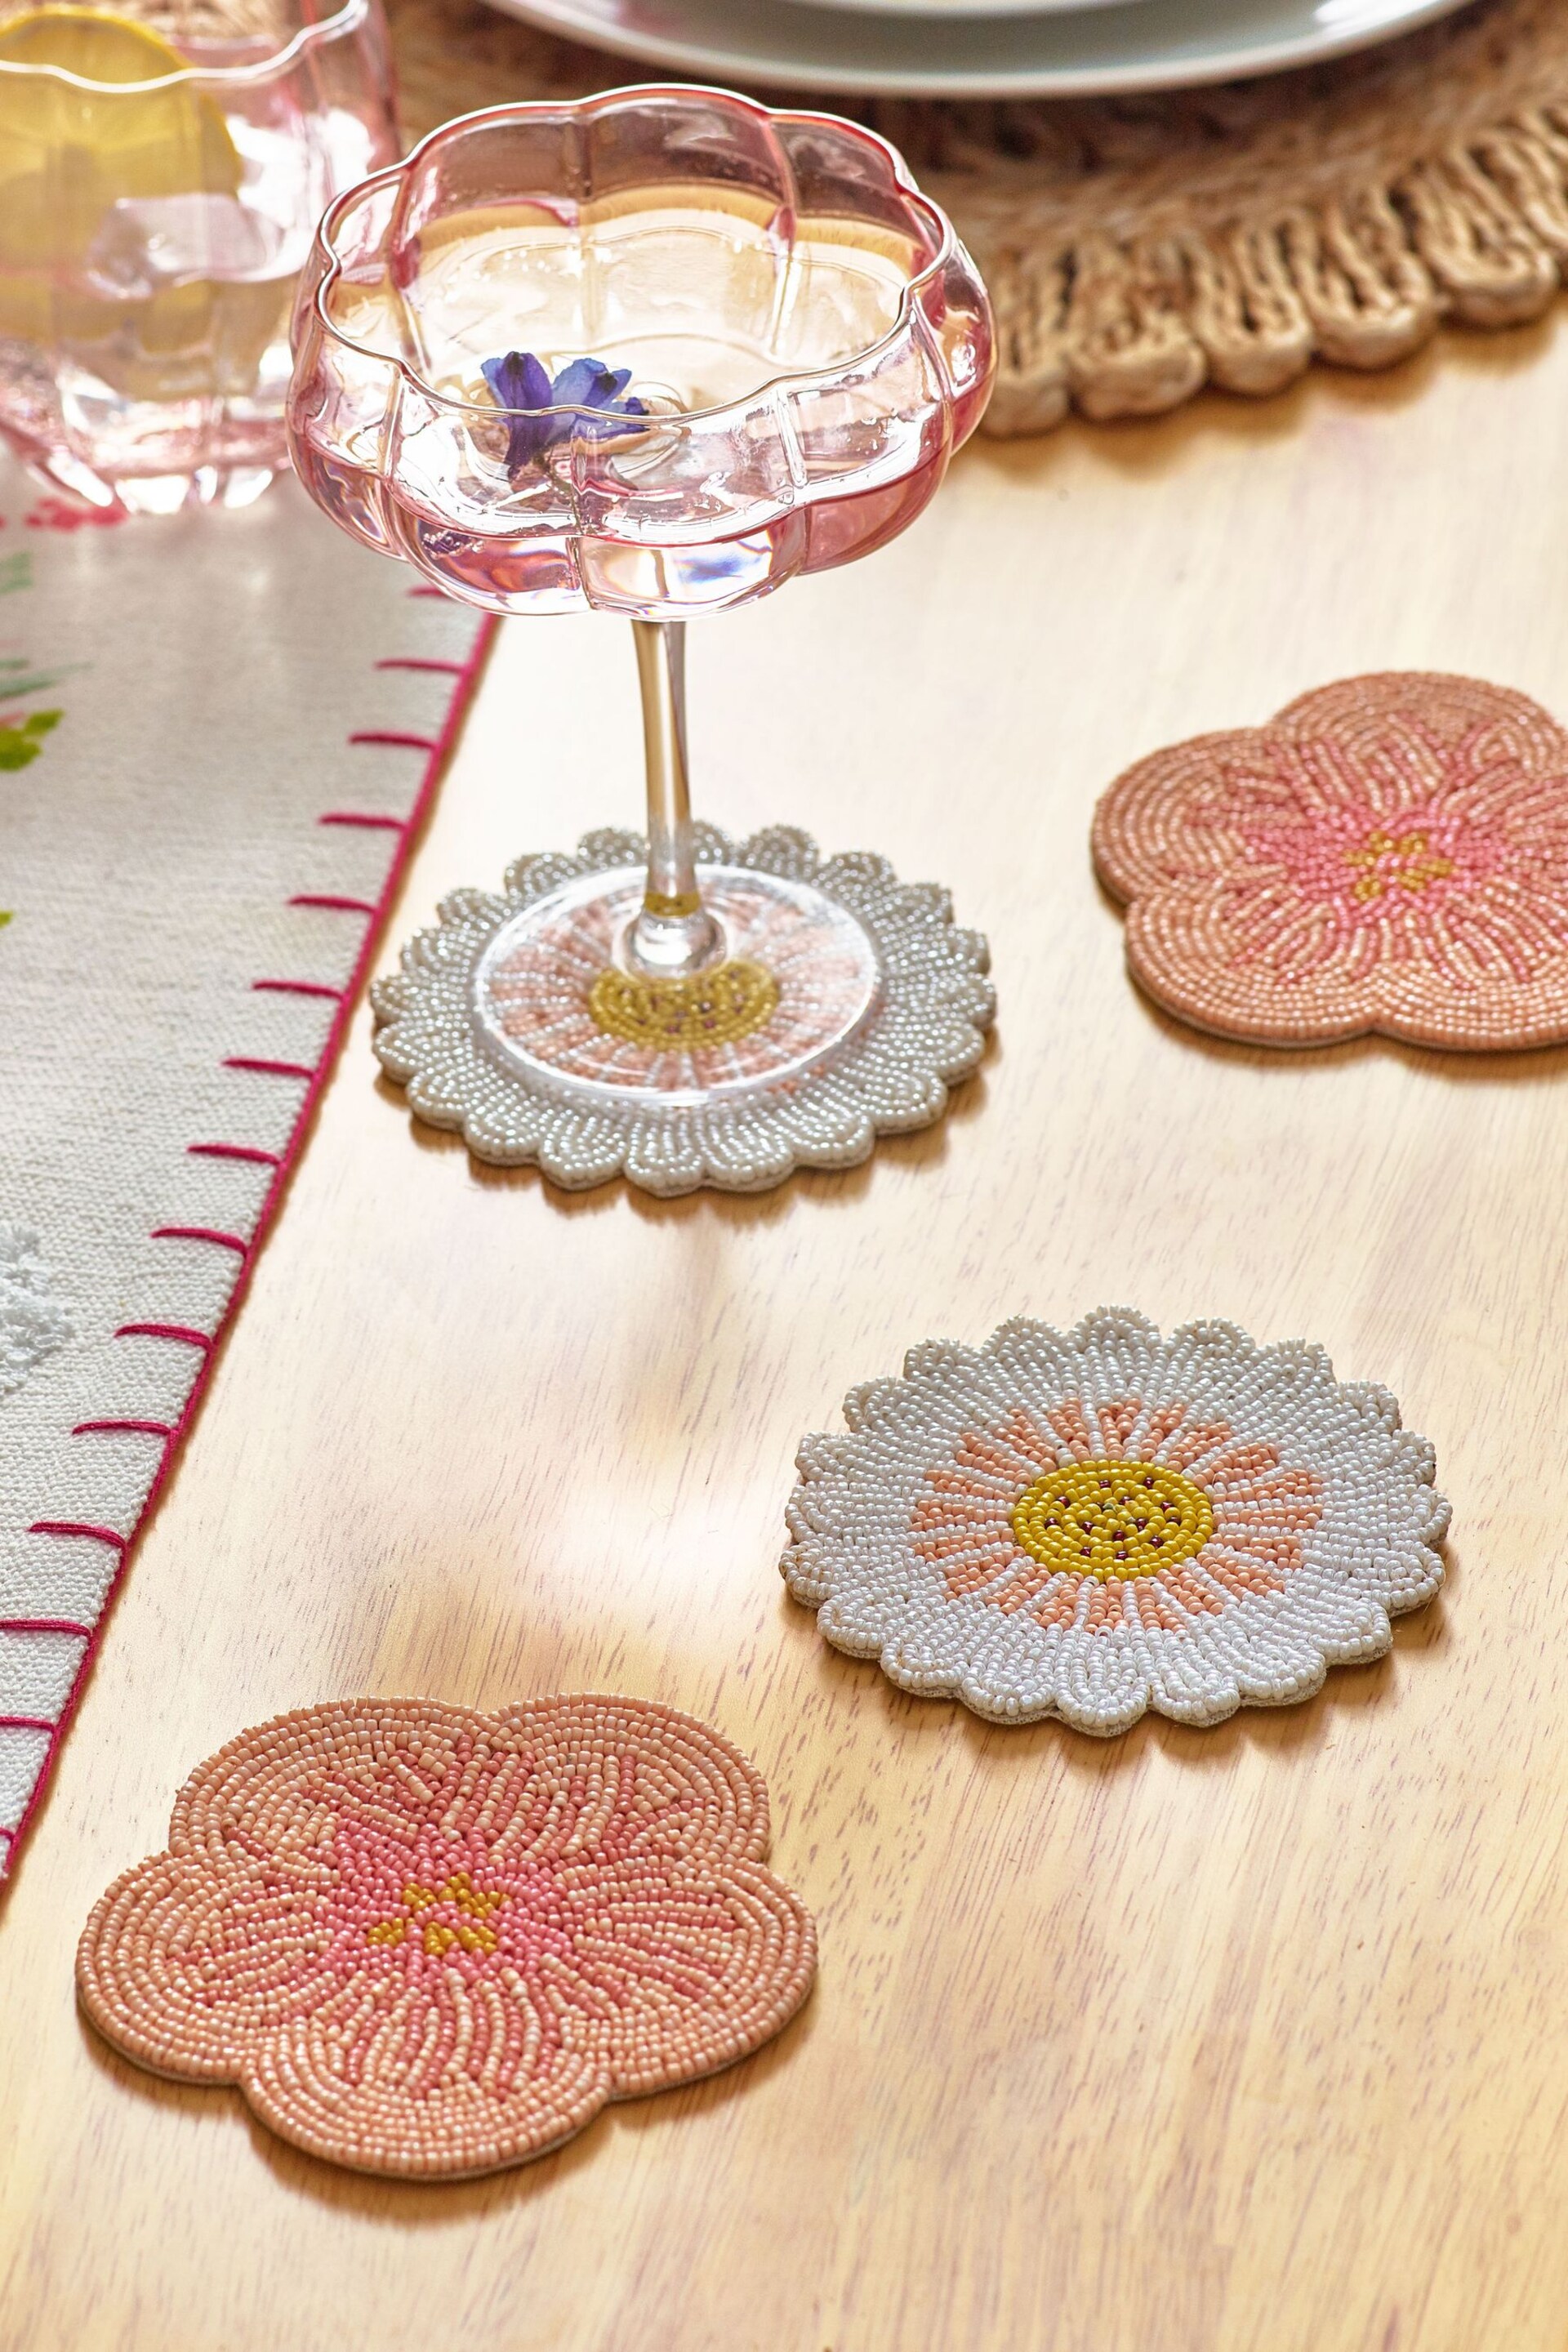 Set of 4 Pink Floral Beaded Coasters - Image 1 of 3